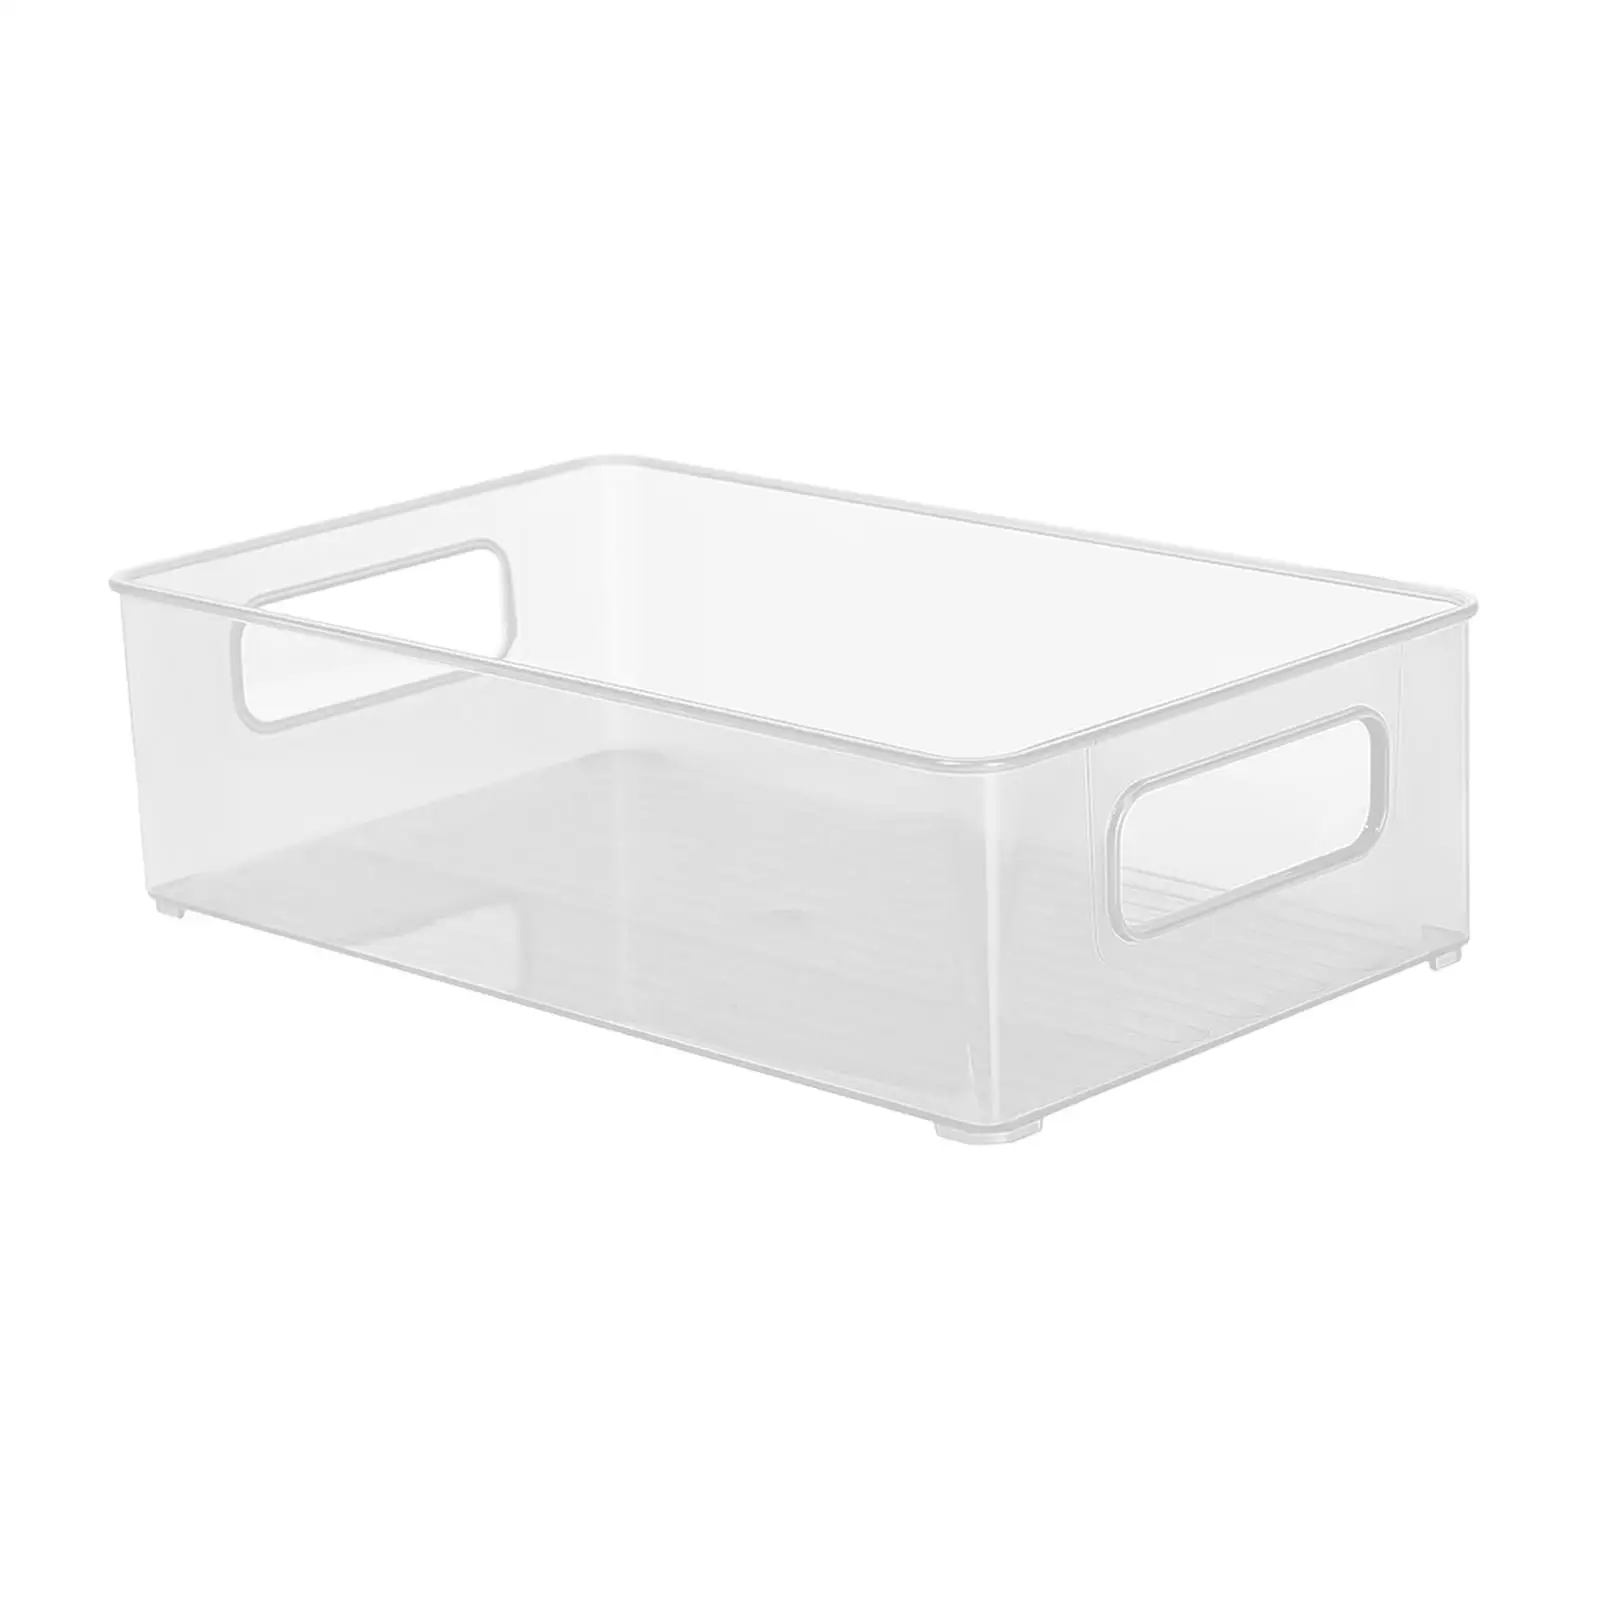 Desktop Makeup Vanity Box Display Case 10.43inchx6.30inchx2.95inch Snack Container for Drawer Bedroom Cabinets Pantry Kitchen